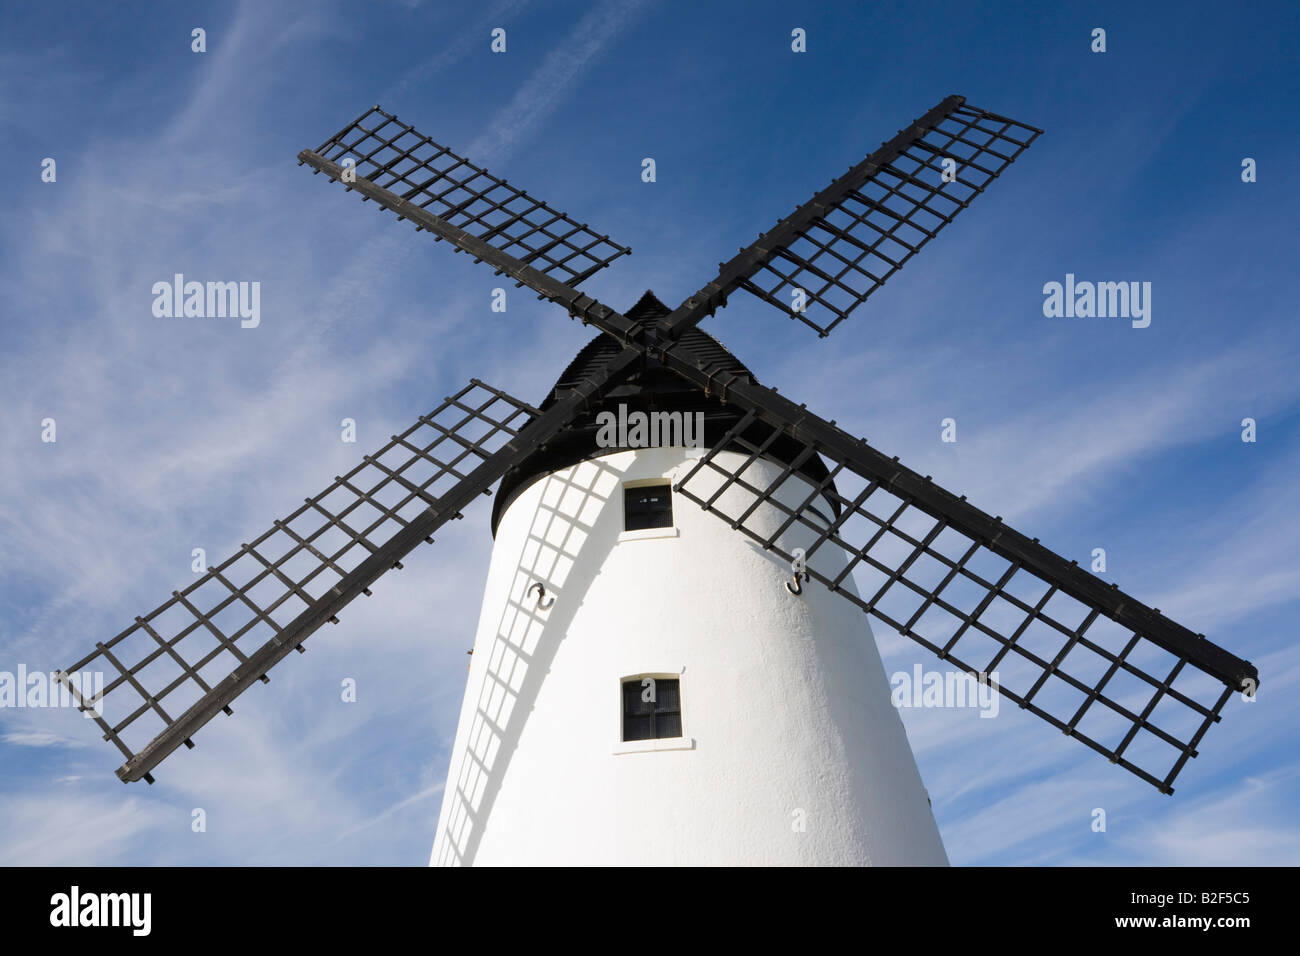 Lytham St Annes Lancashire England UK Restored 19th century windmill detail showing sails 1805 Now a museum Stock Photo